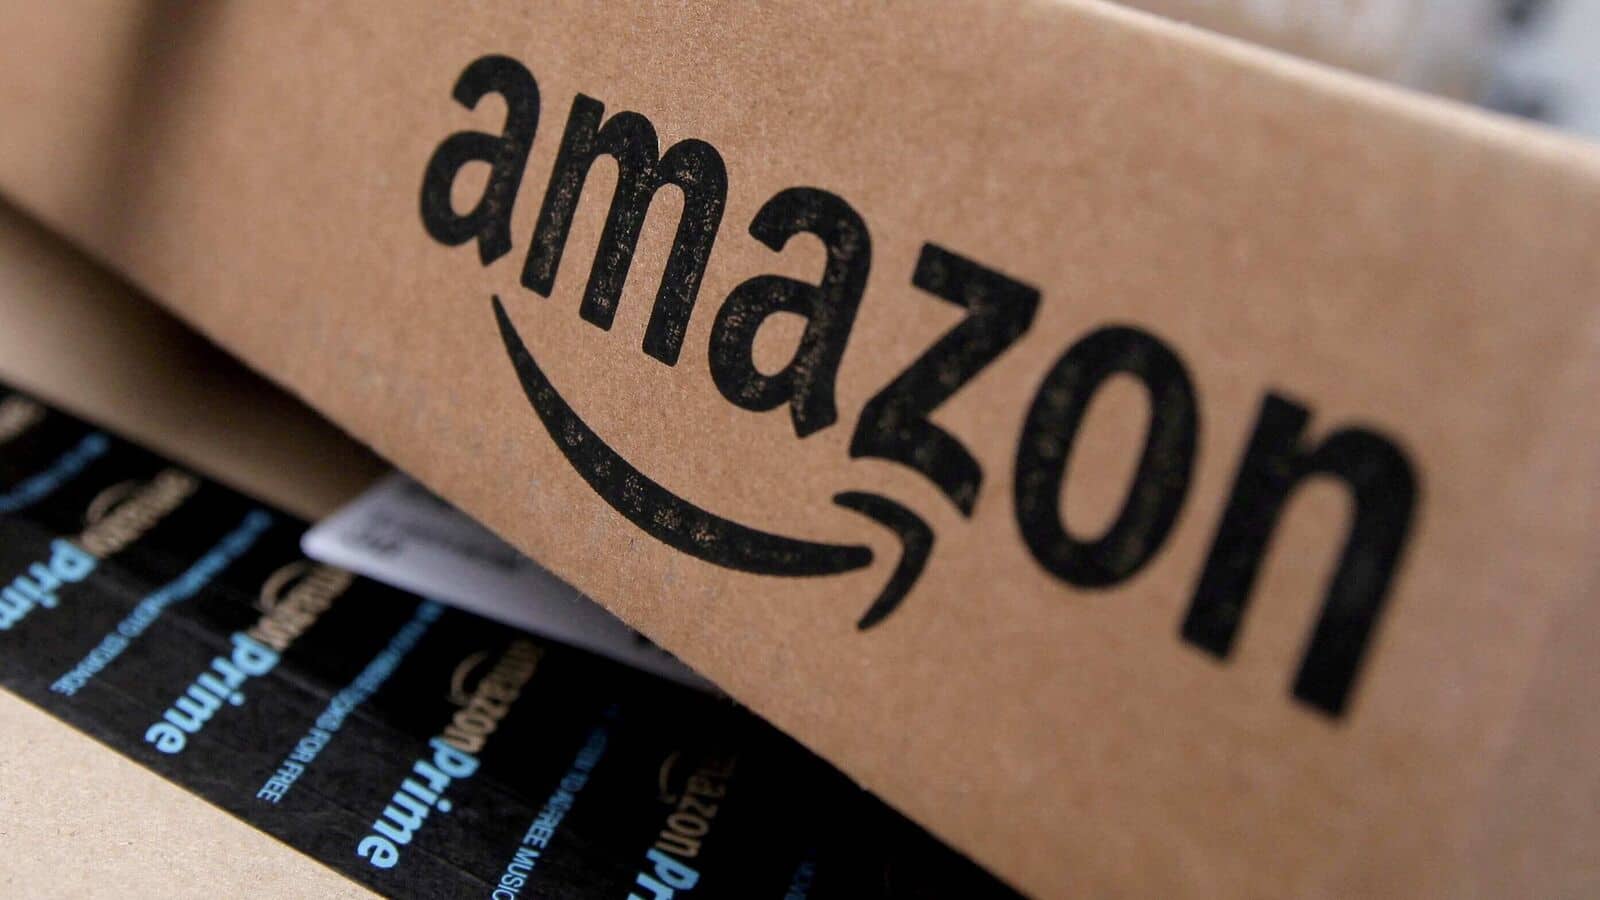 Amazon.com Inc. is the world's first public business to lose a trillion dollars in market value this year, owing to a combination of rising inflation, tightening monetary policy and poor financial reports.